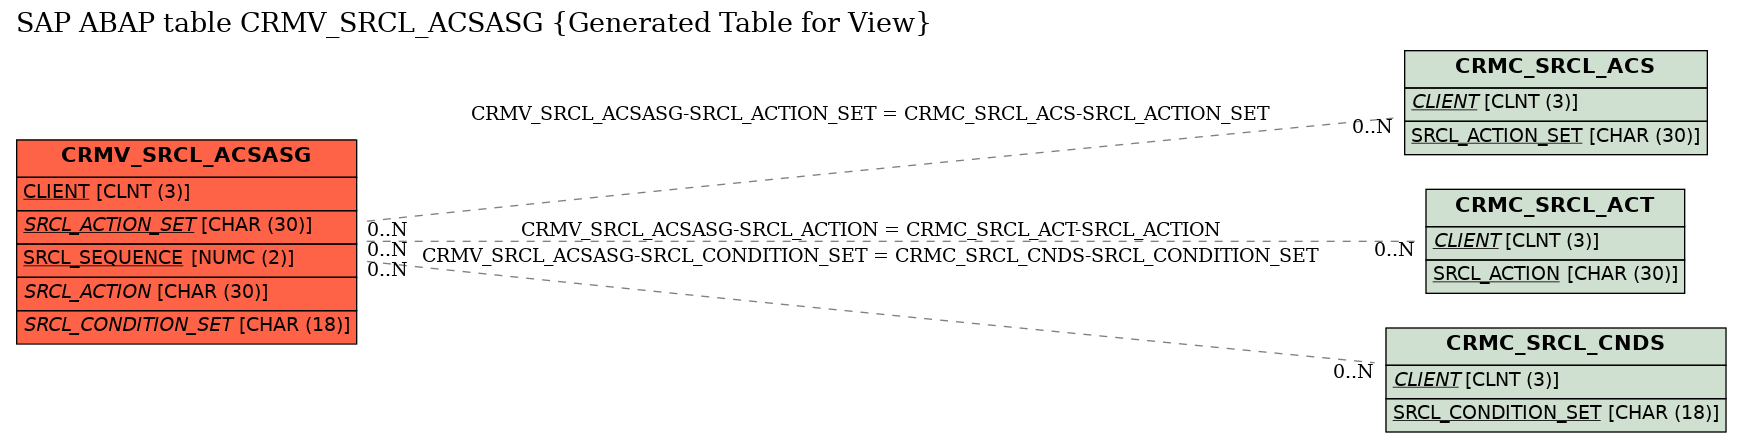 E-R Diagram for table CRMV_SRCL_ACSASG (Generated Table for View)